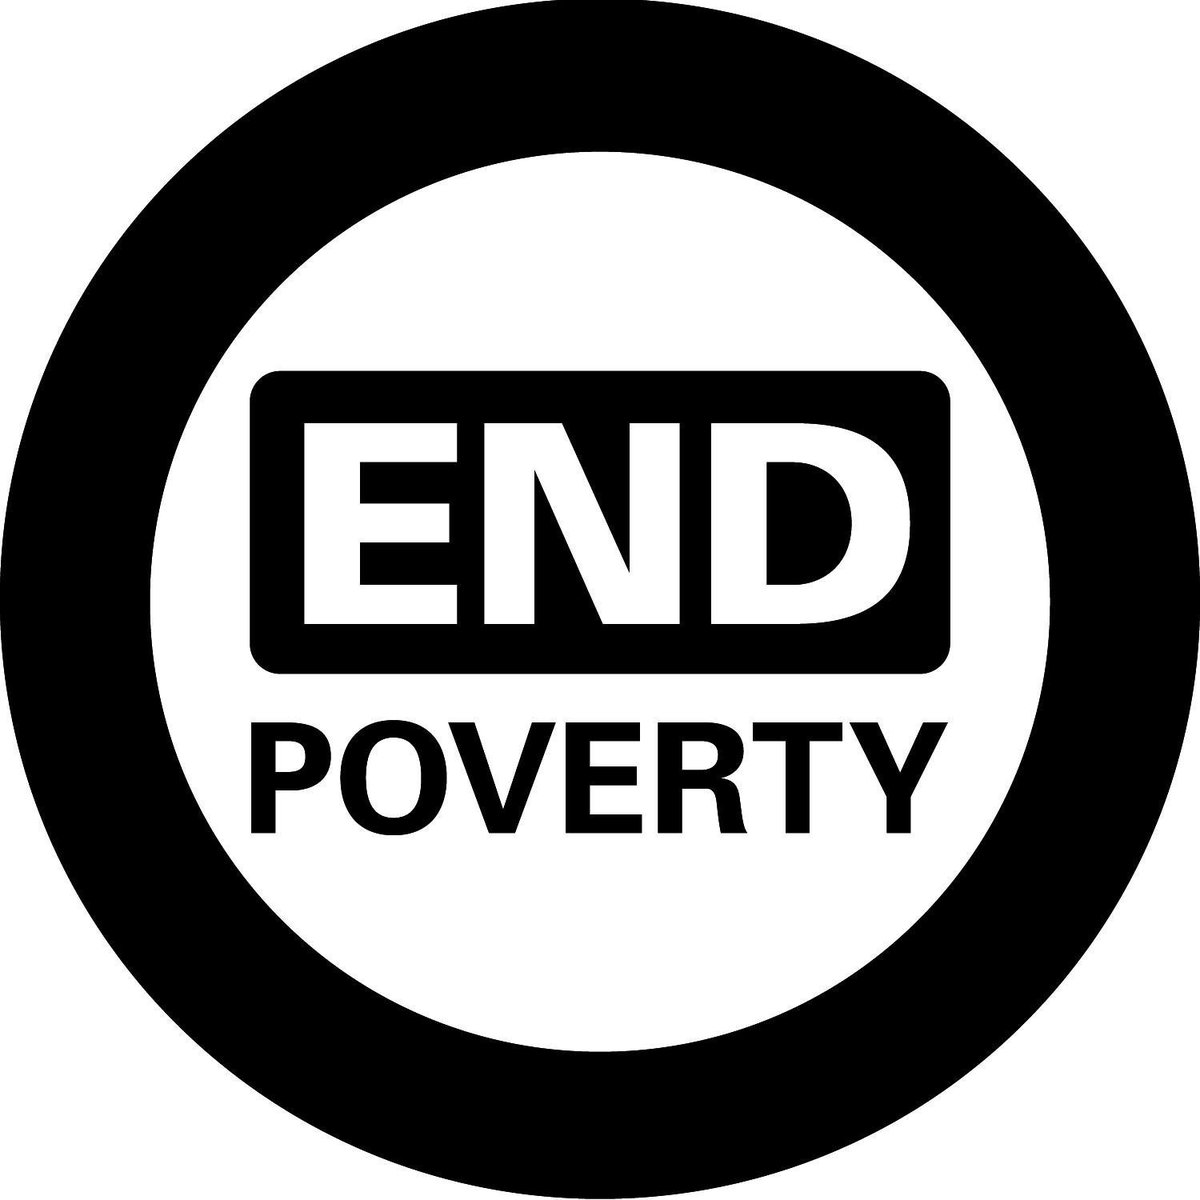 Today is International Day of the Eradication of Poverty. Every child has a right to a standard of living adequate for their physical, mental and social development. #EndPoverty #InternationalDayofEradicationofPoverty